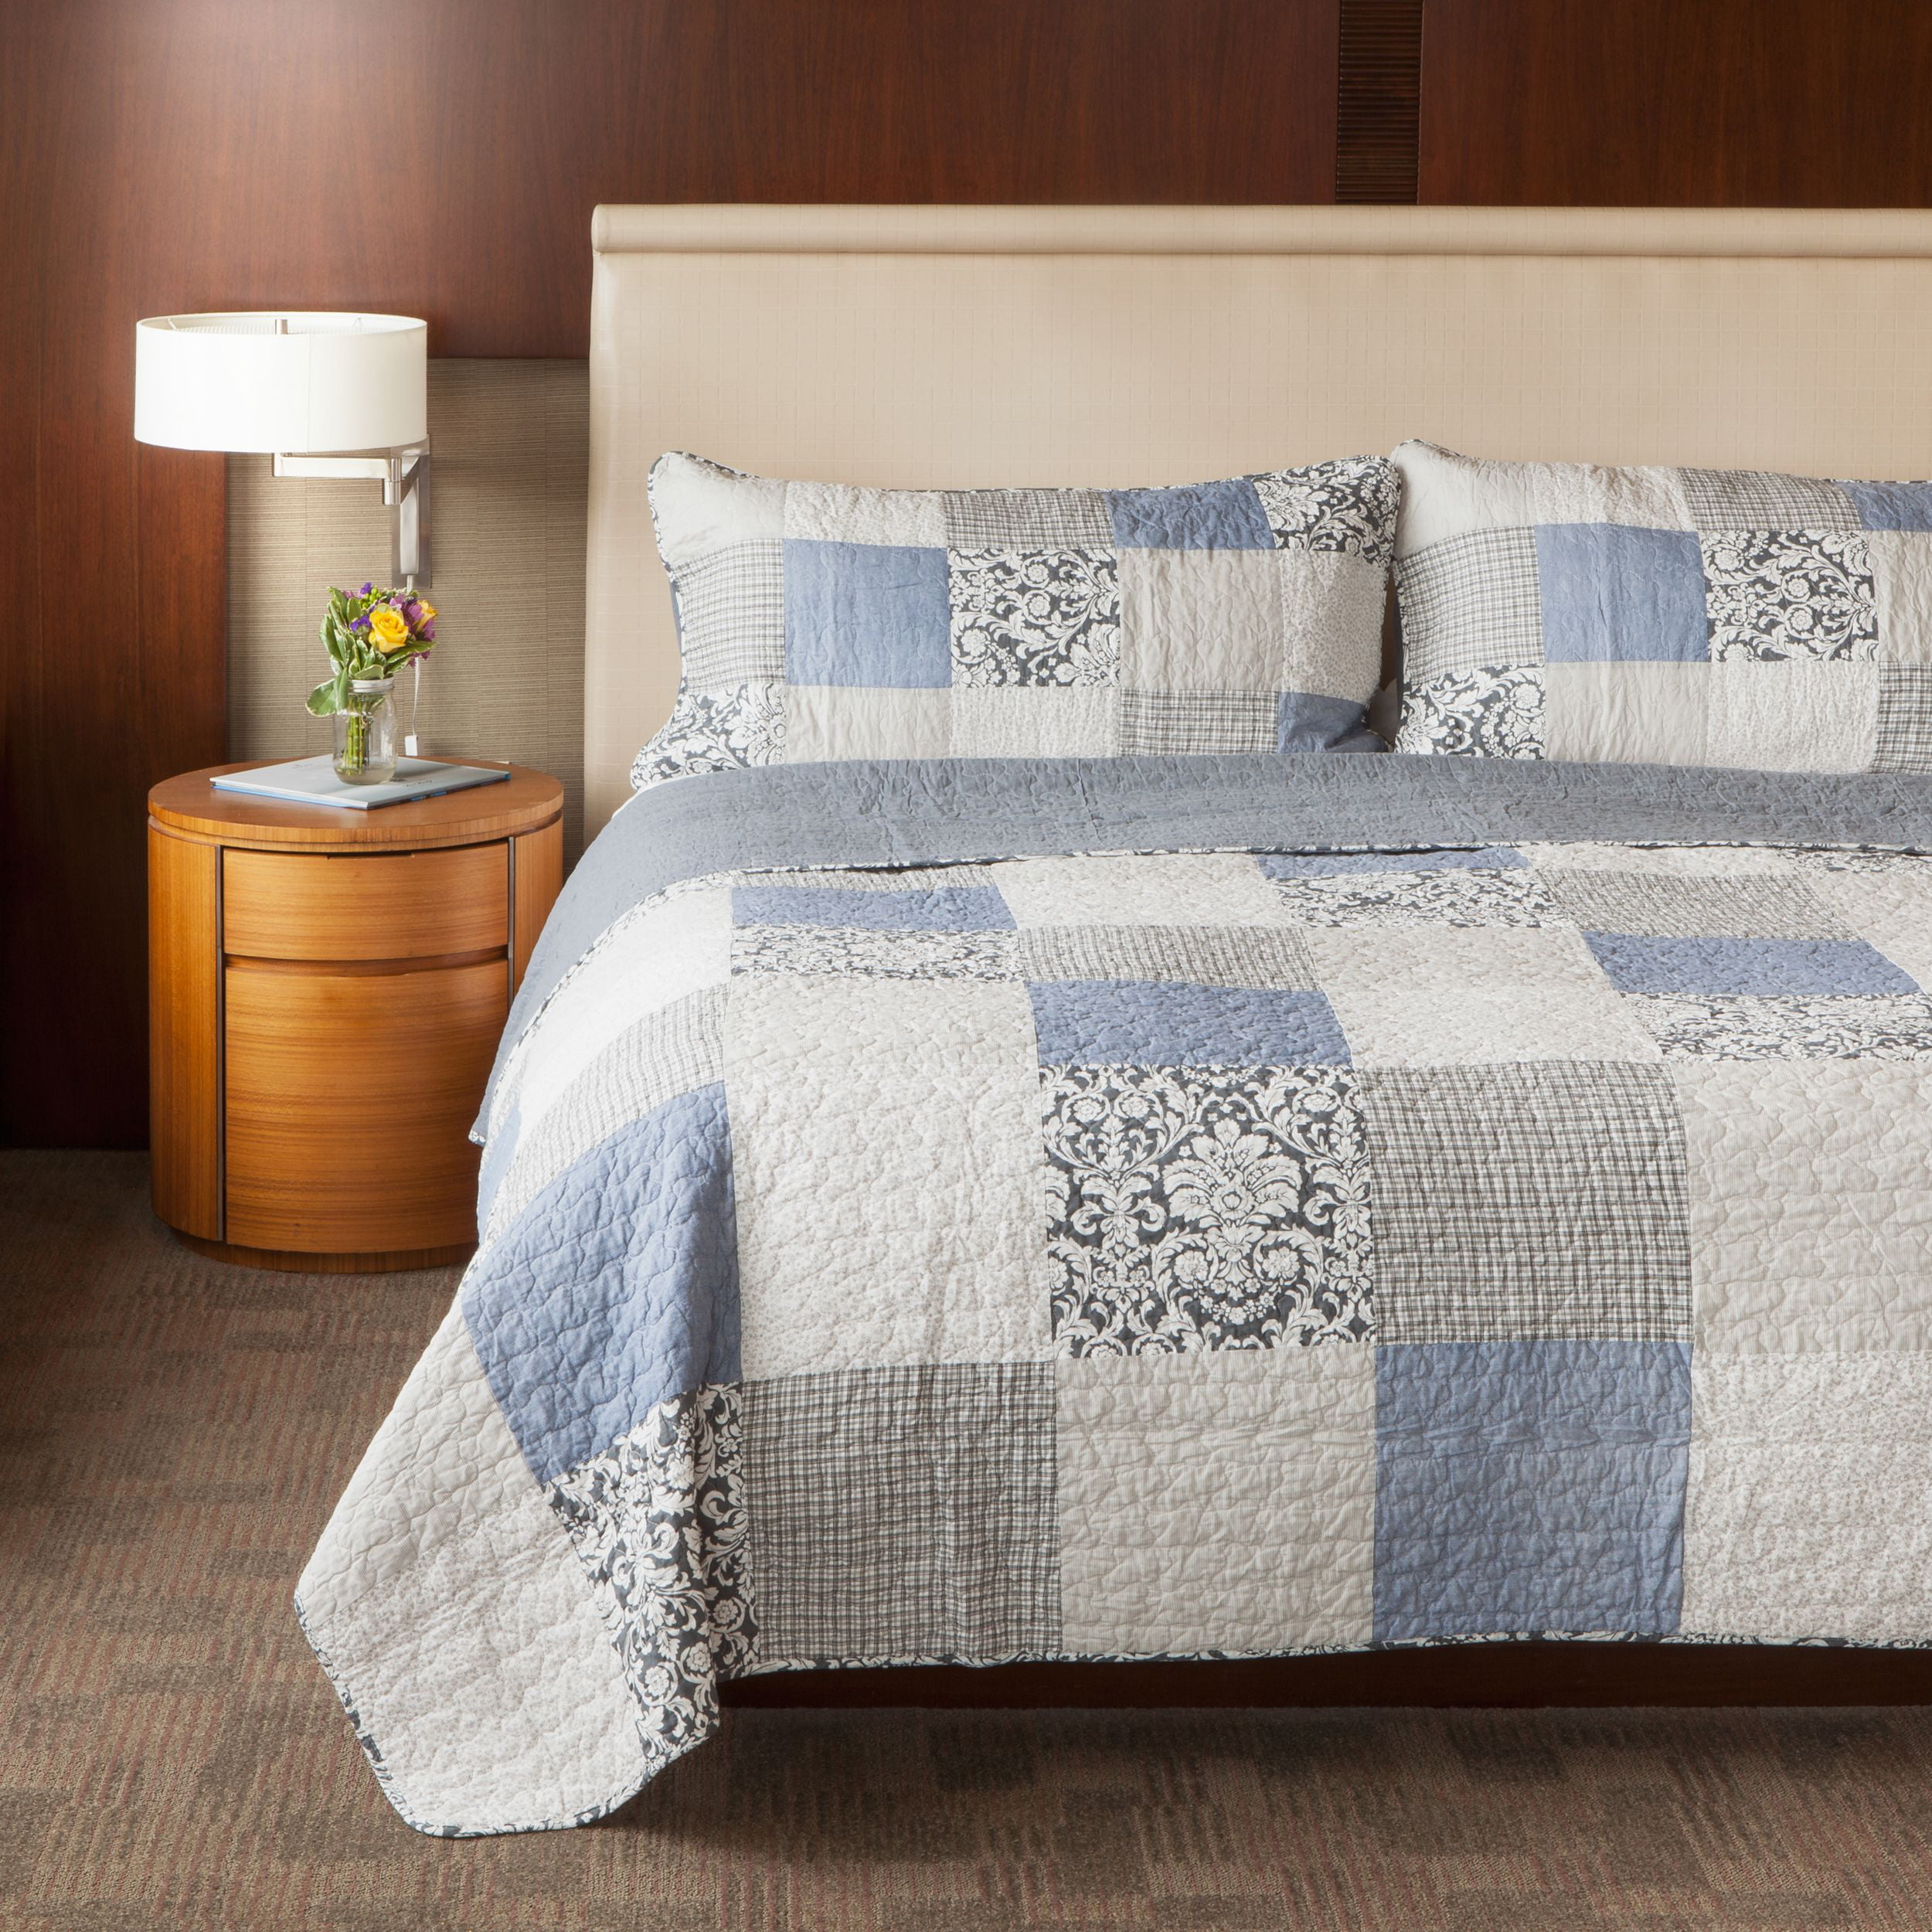 SLPR Sweet Dreams 3Piece Patchwork Cotton Bedding Quilt Set King with 2 Shams Blue Country